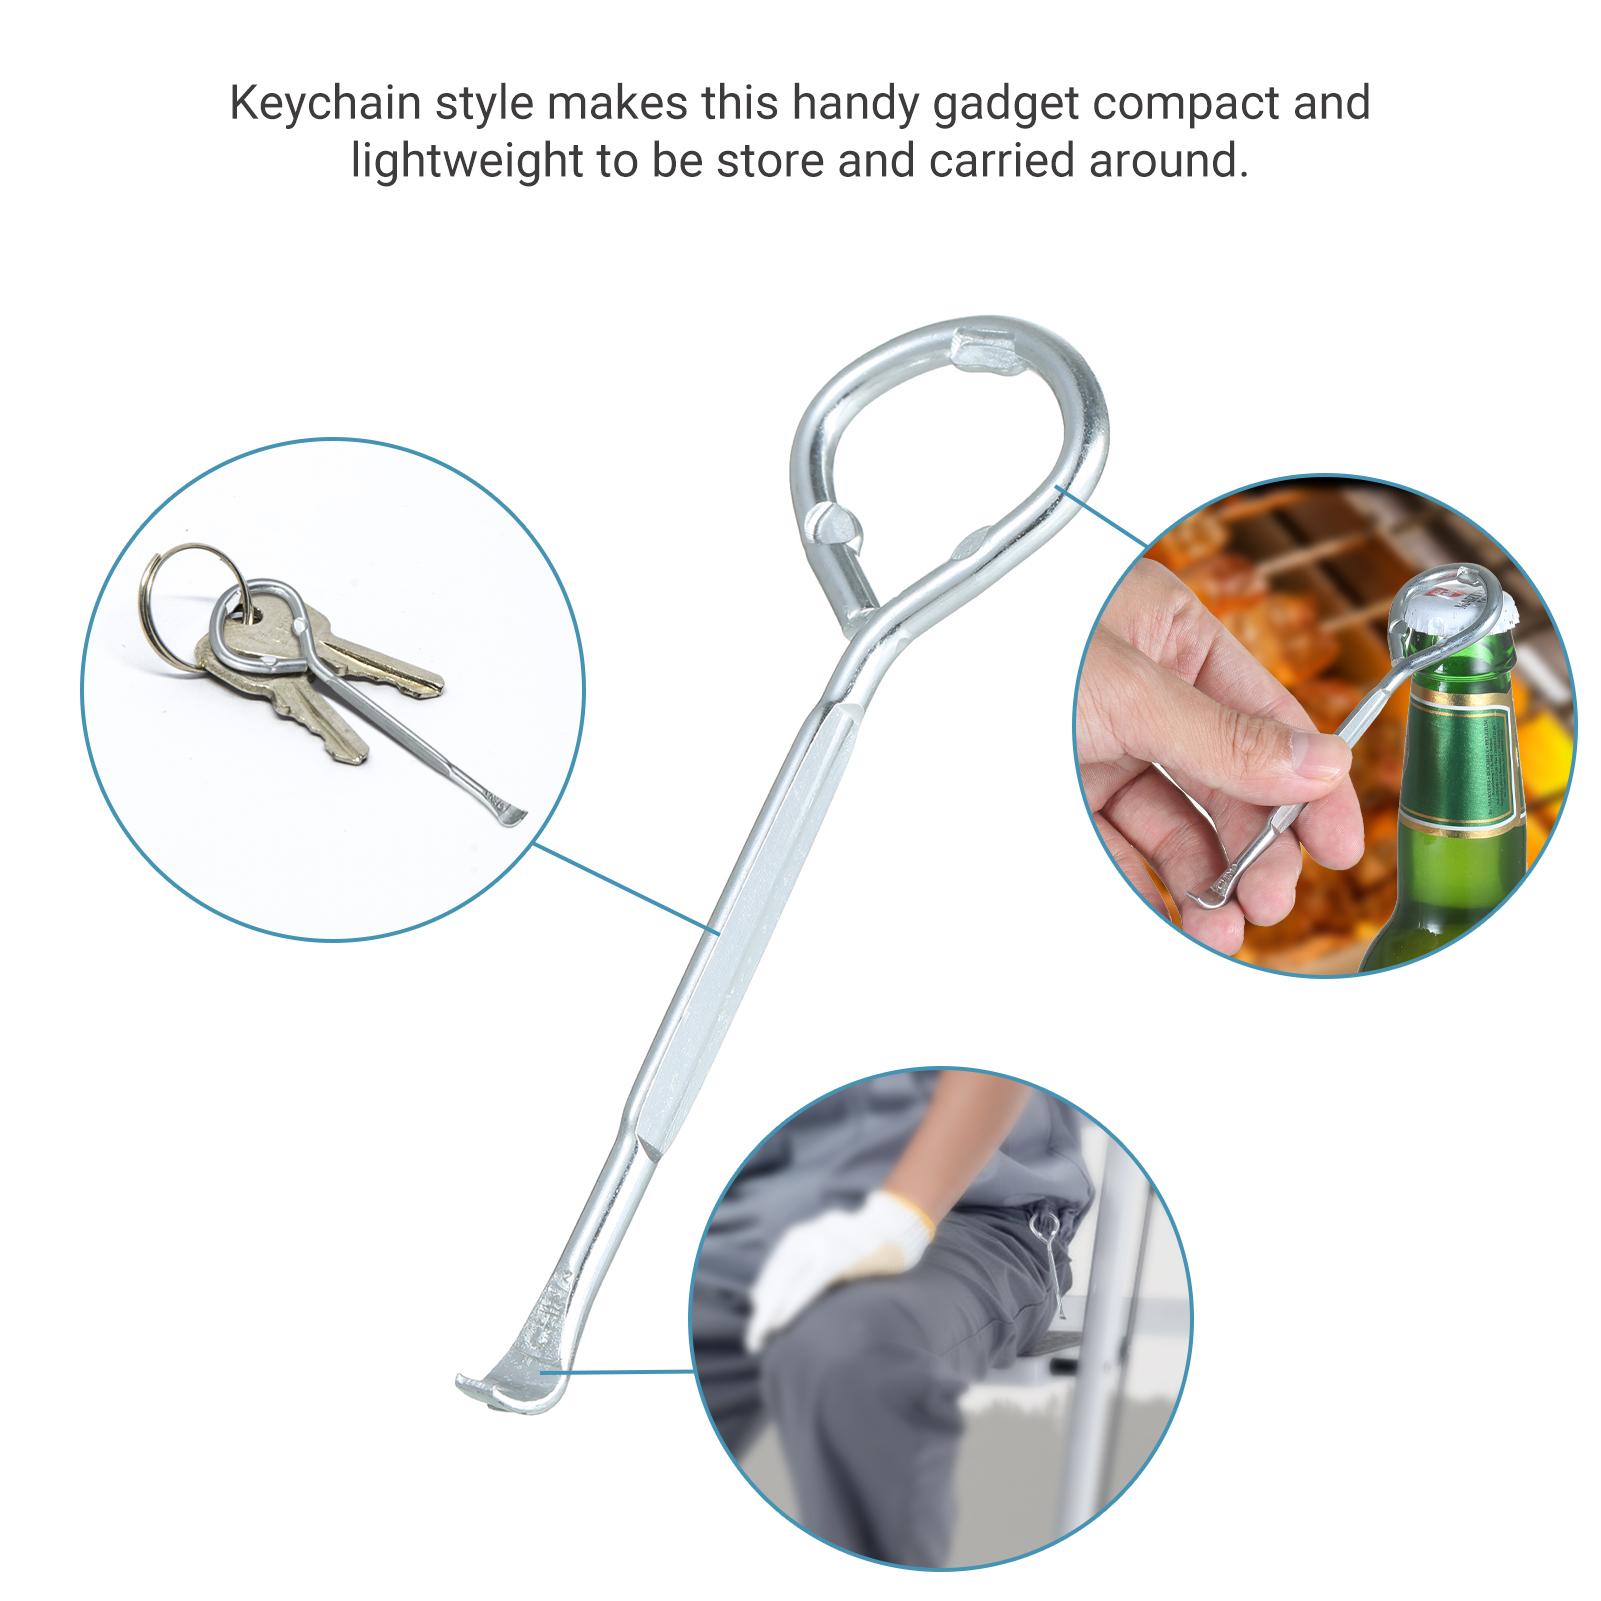 Heavy-Duty Can and Bottle Opener Keychain Bottle Opener Manual Tin Bottle Cap Opener with Smooth Edge